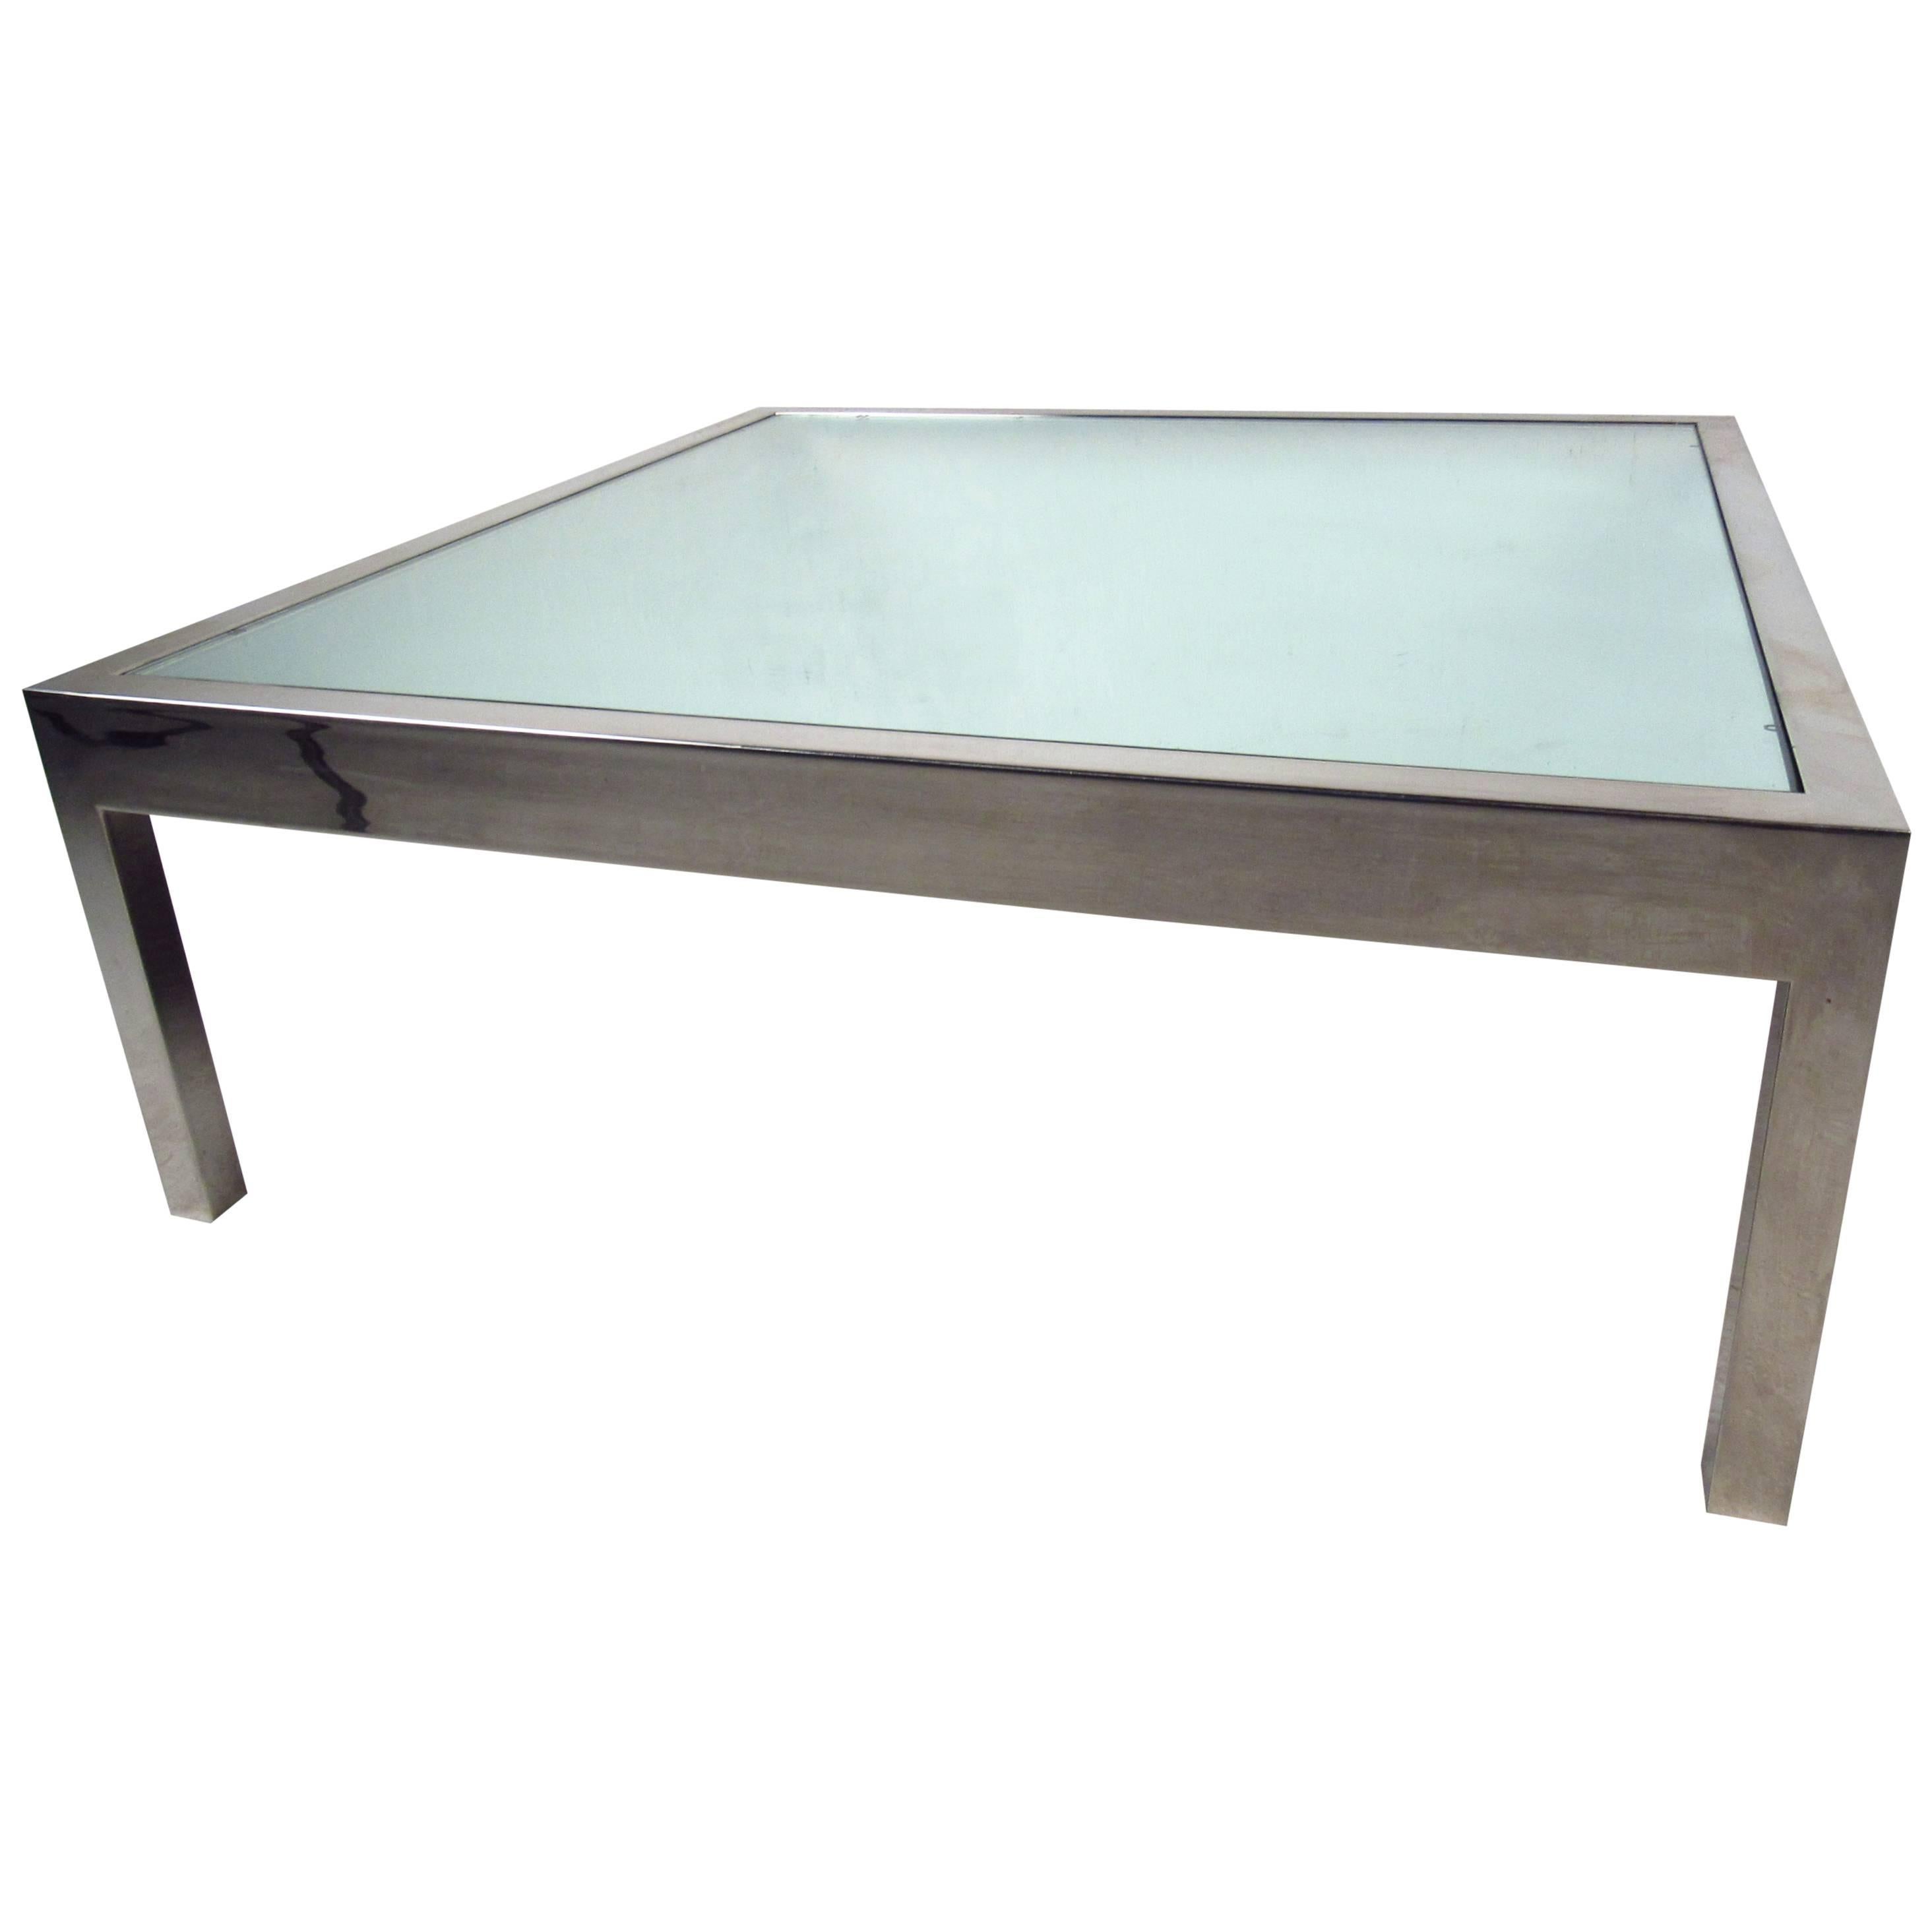 Unique Midcentury Mirrored Glass and Chrome Coffee Table